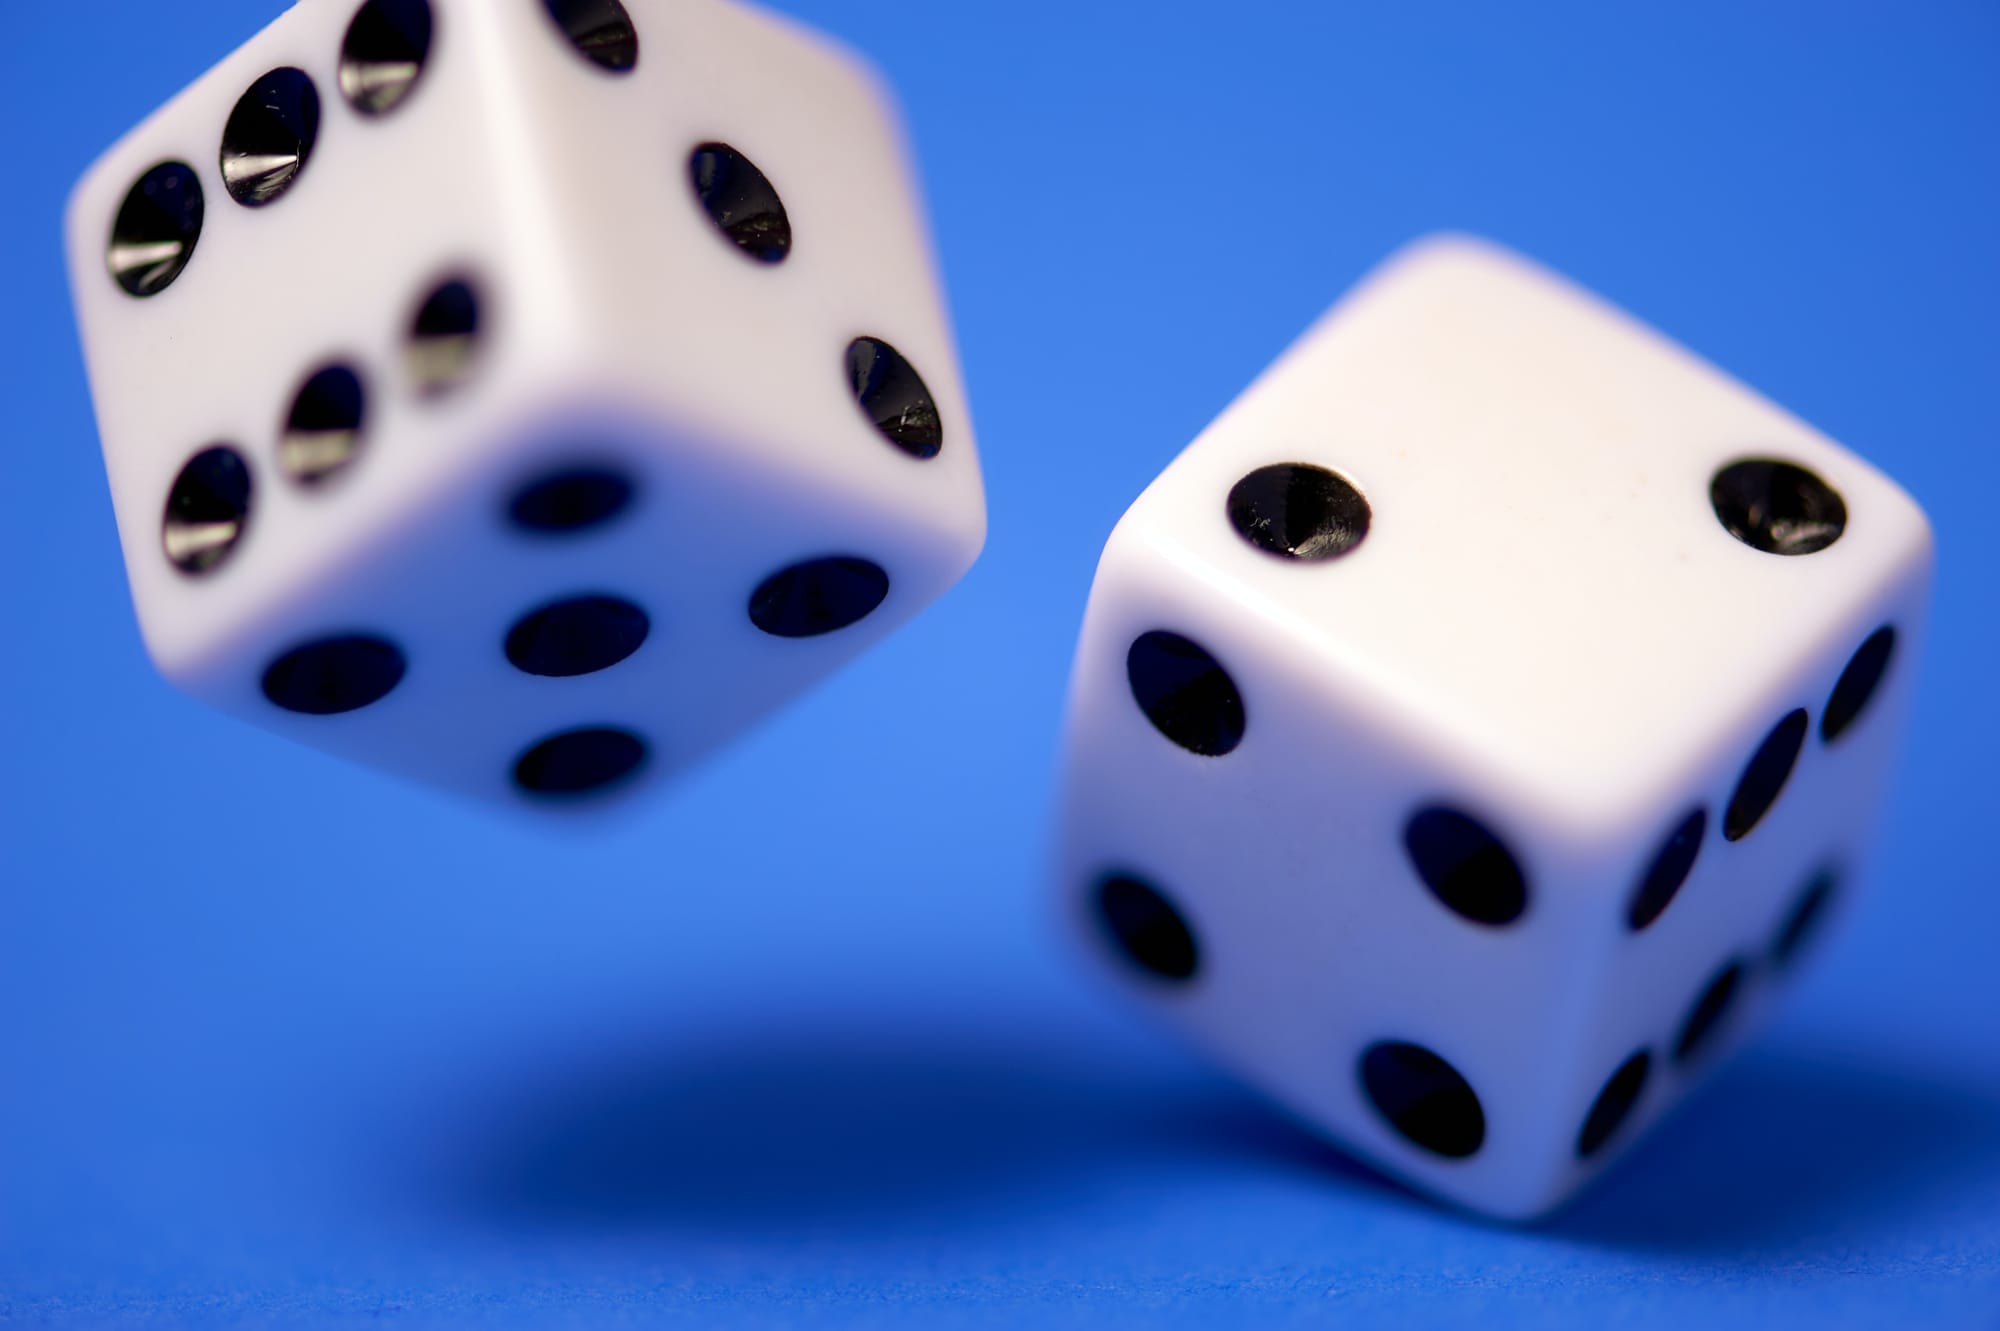 Two dices on a blue background.